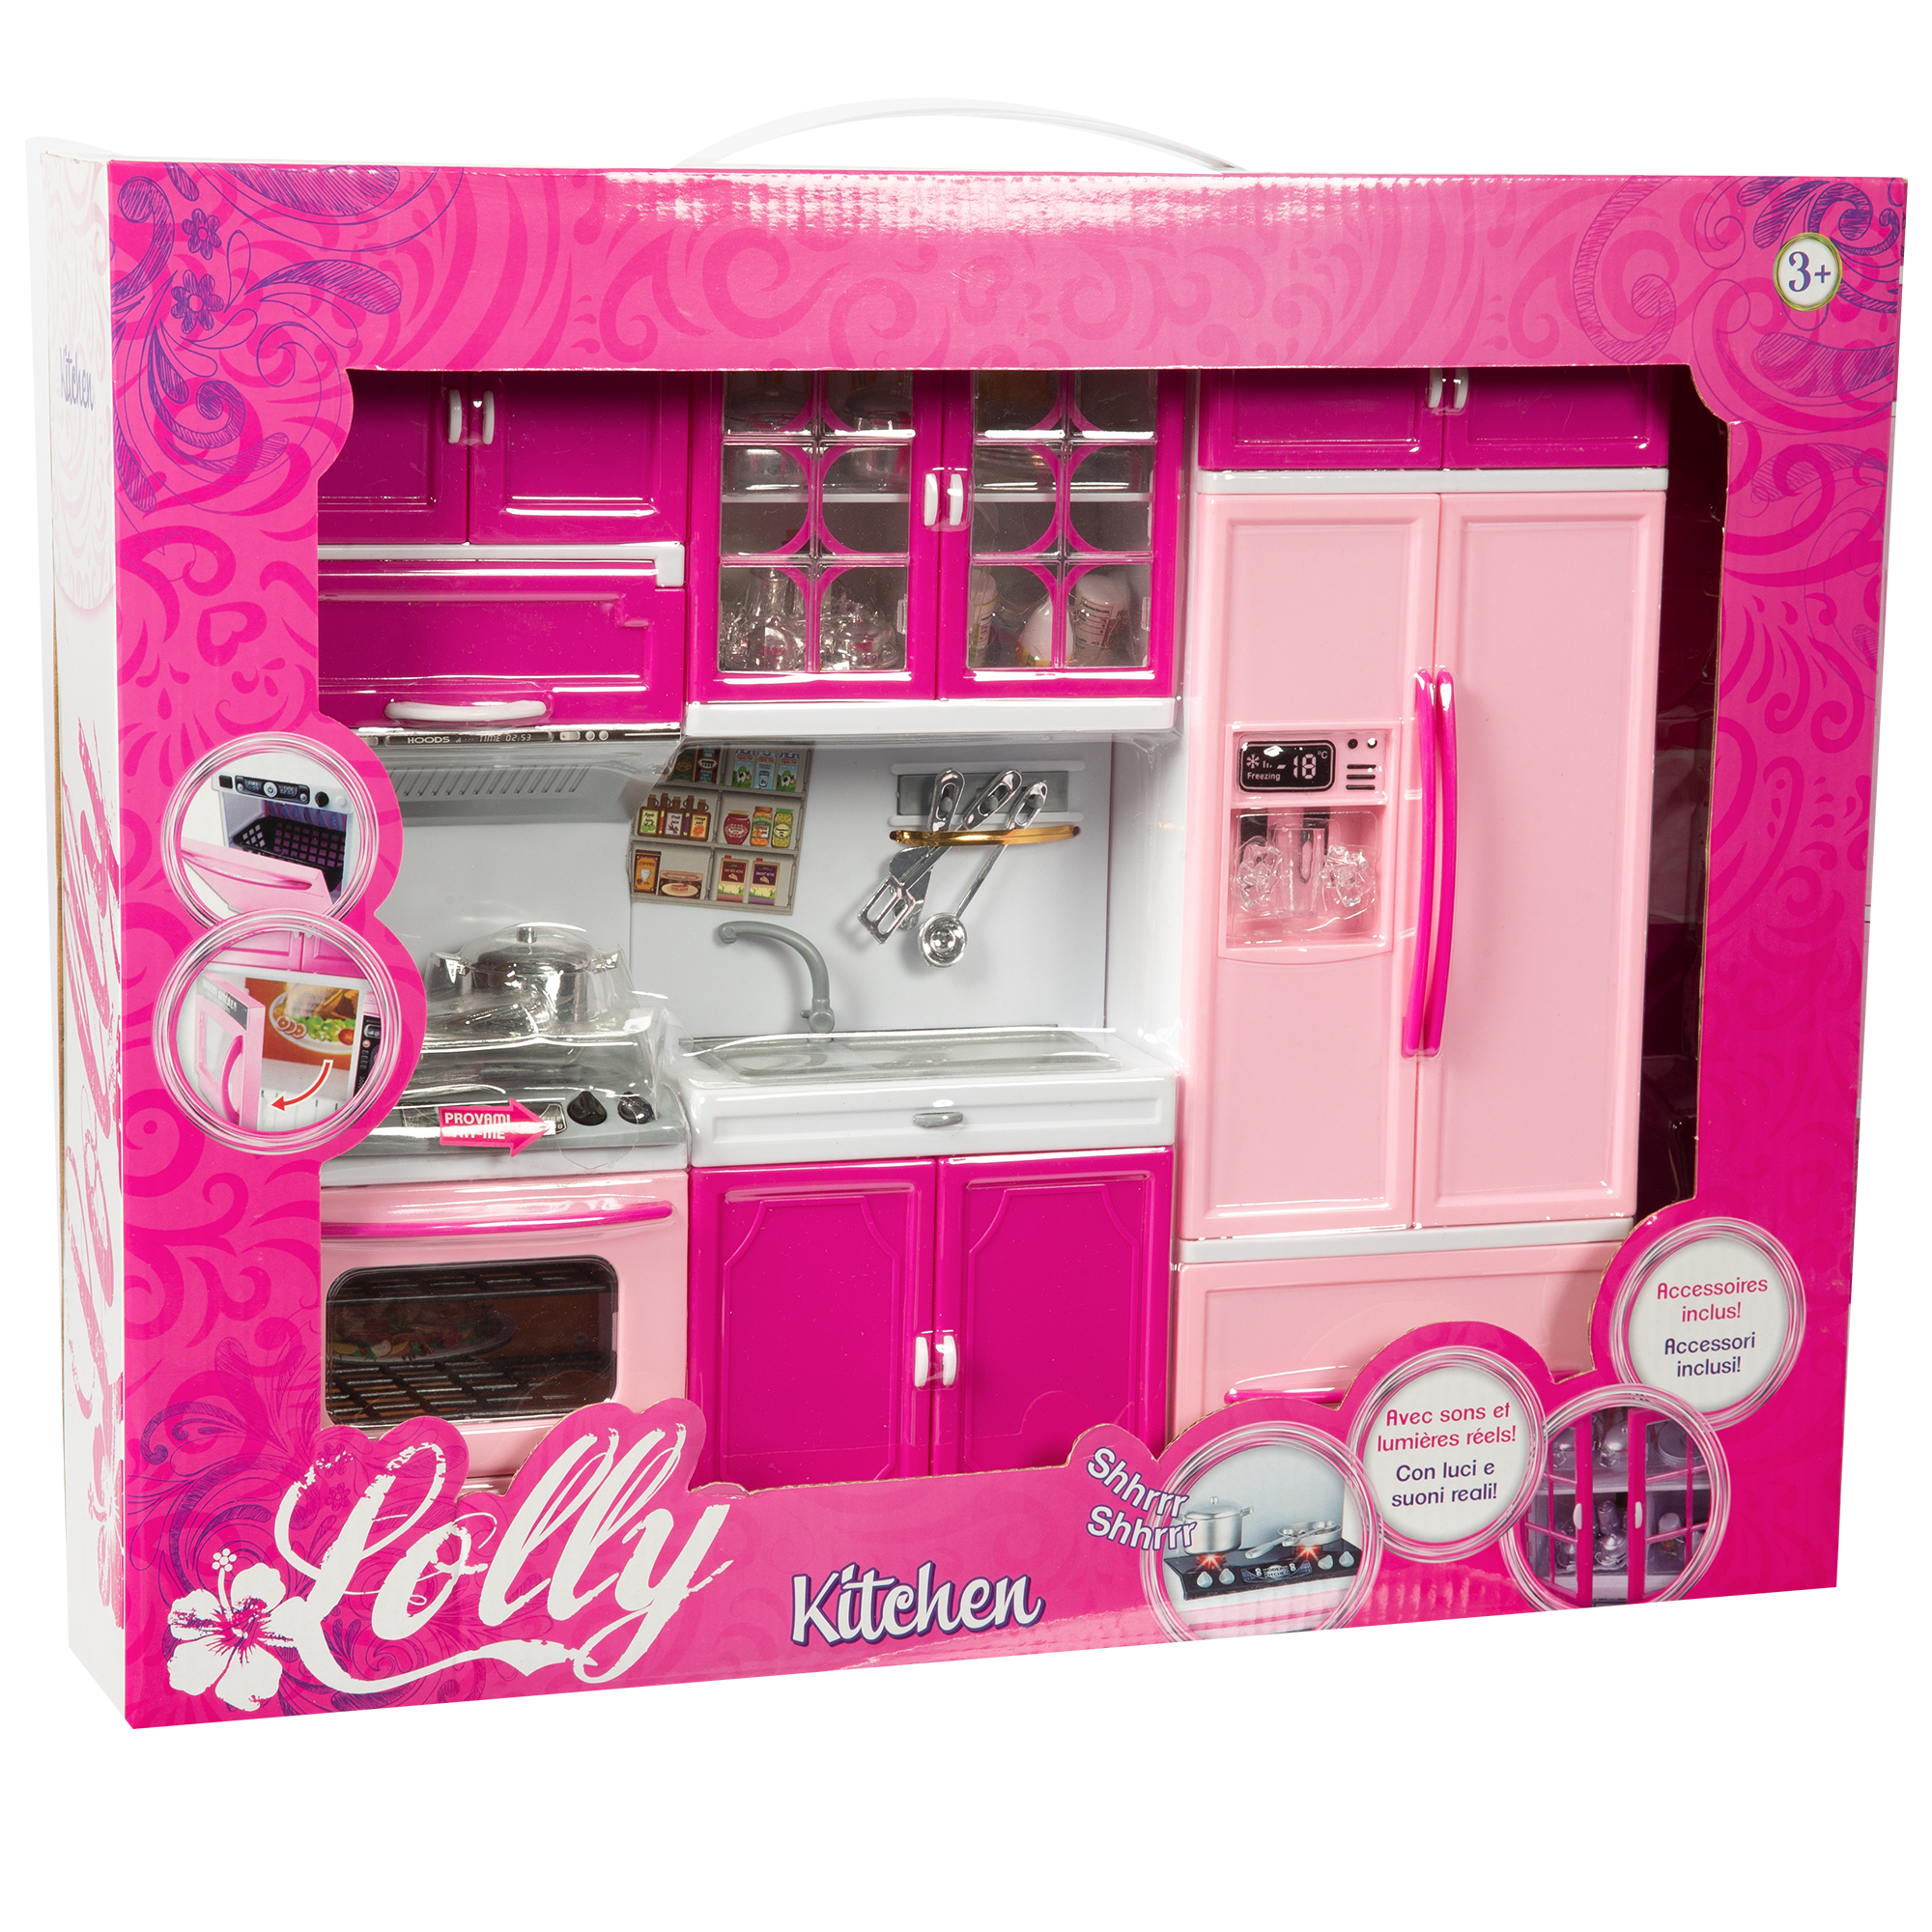 Lolly kitchen - LOLLY